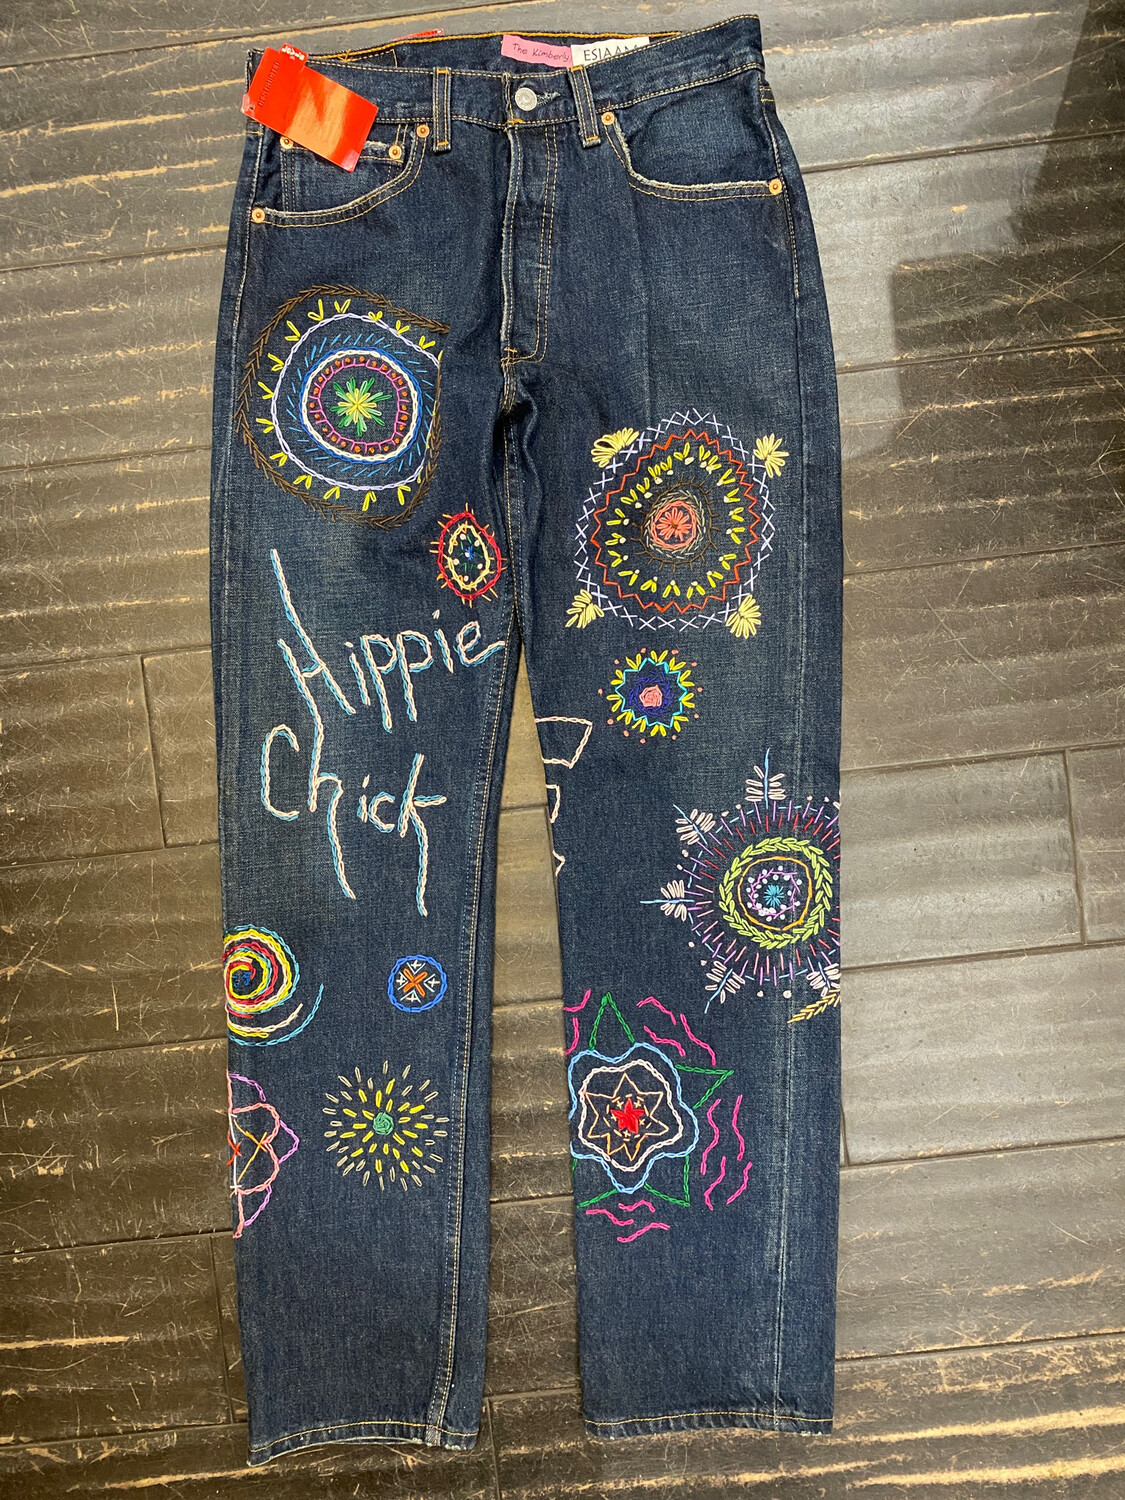 ESIAAM Levi's 501 Hand-Embroidered “Hippie Chick” Jeans 31 X 32 Wedgie Straight